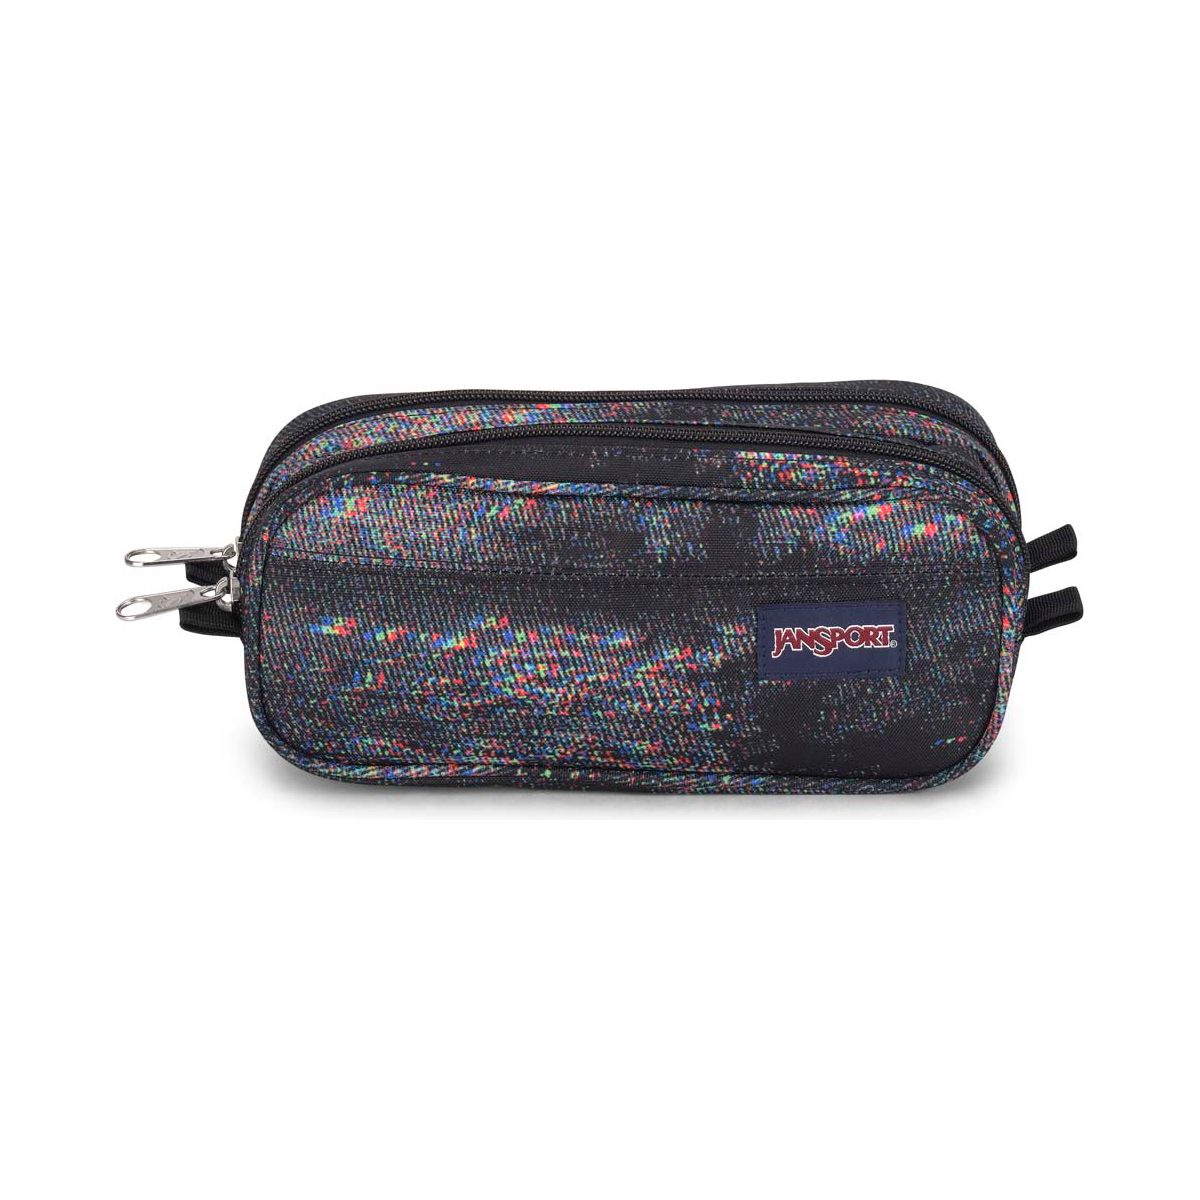 JanSport Large Accessory Pouch - Screen Static